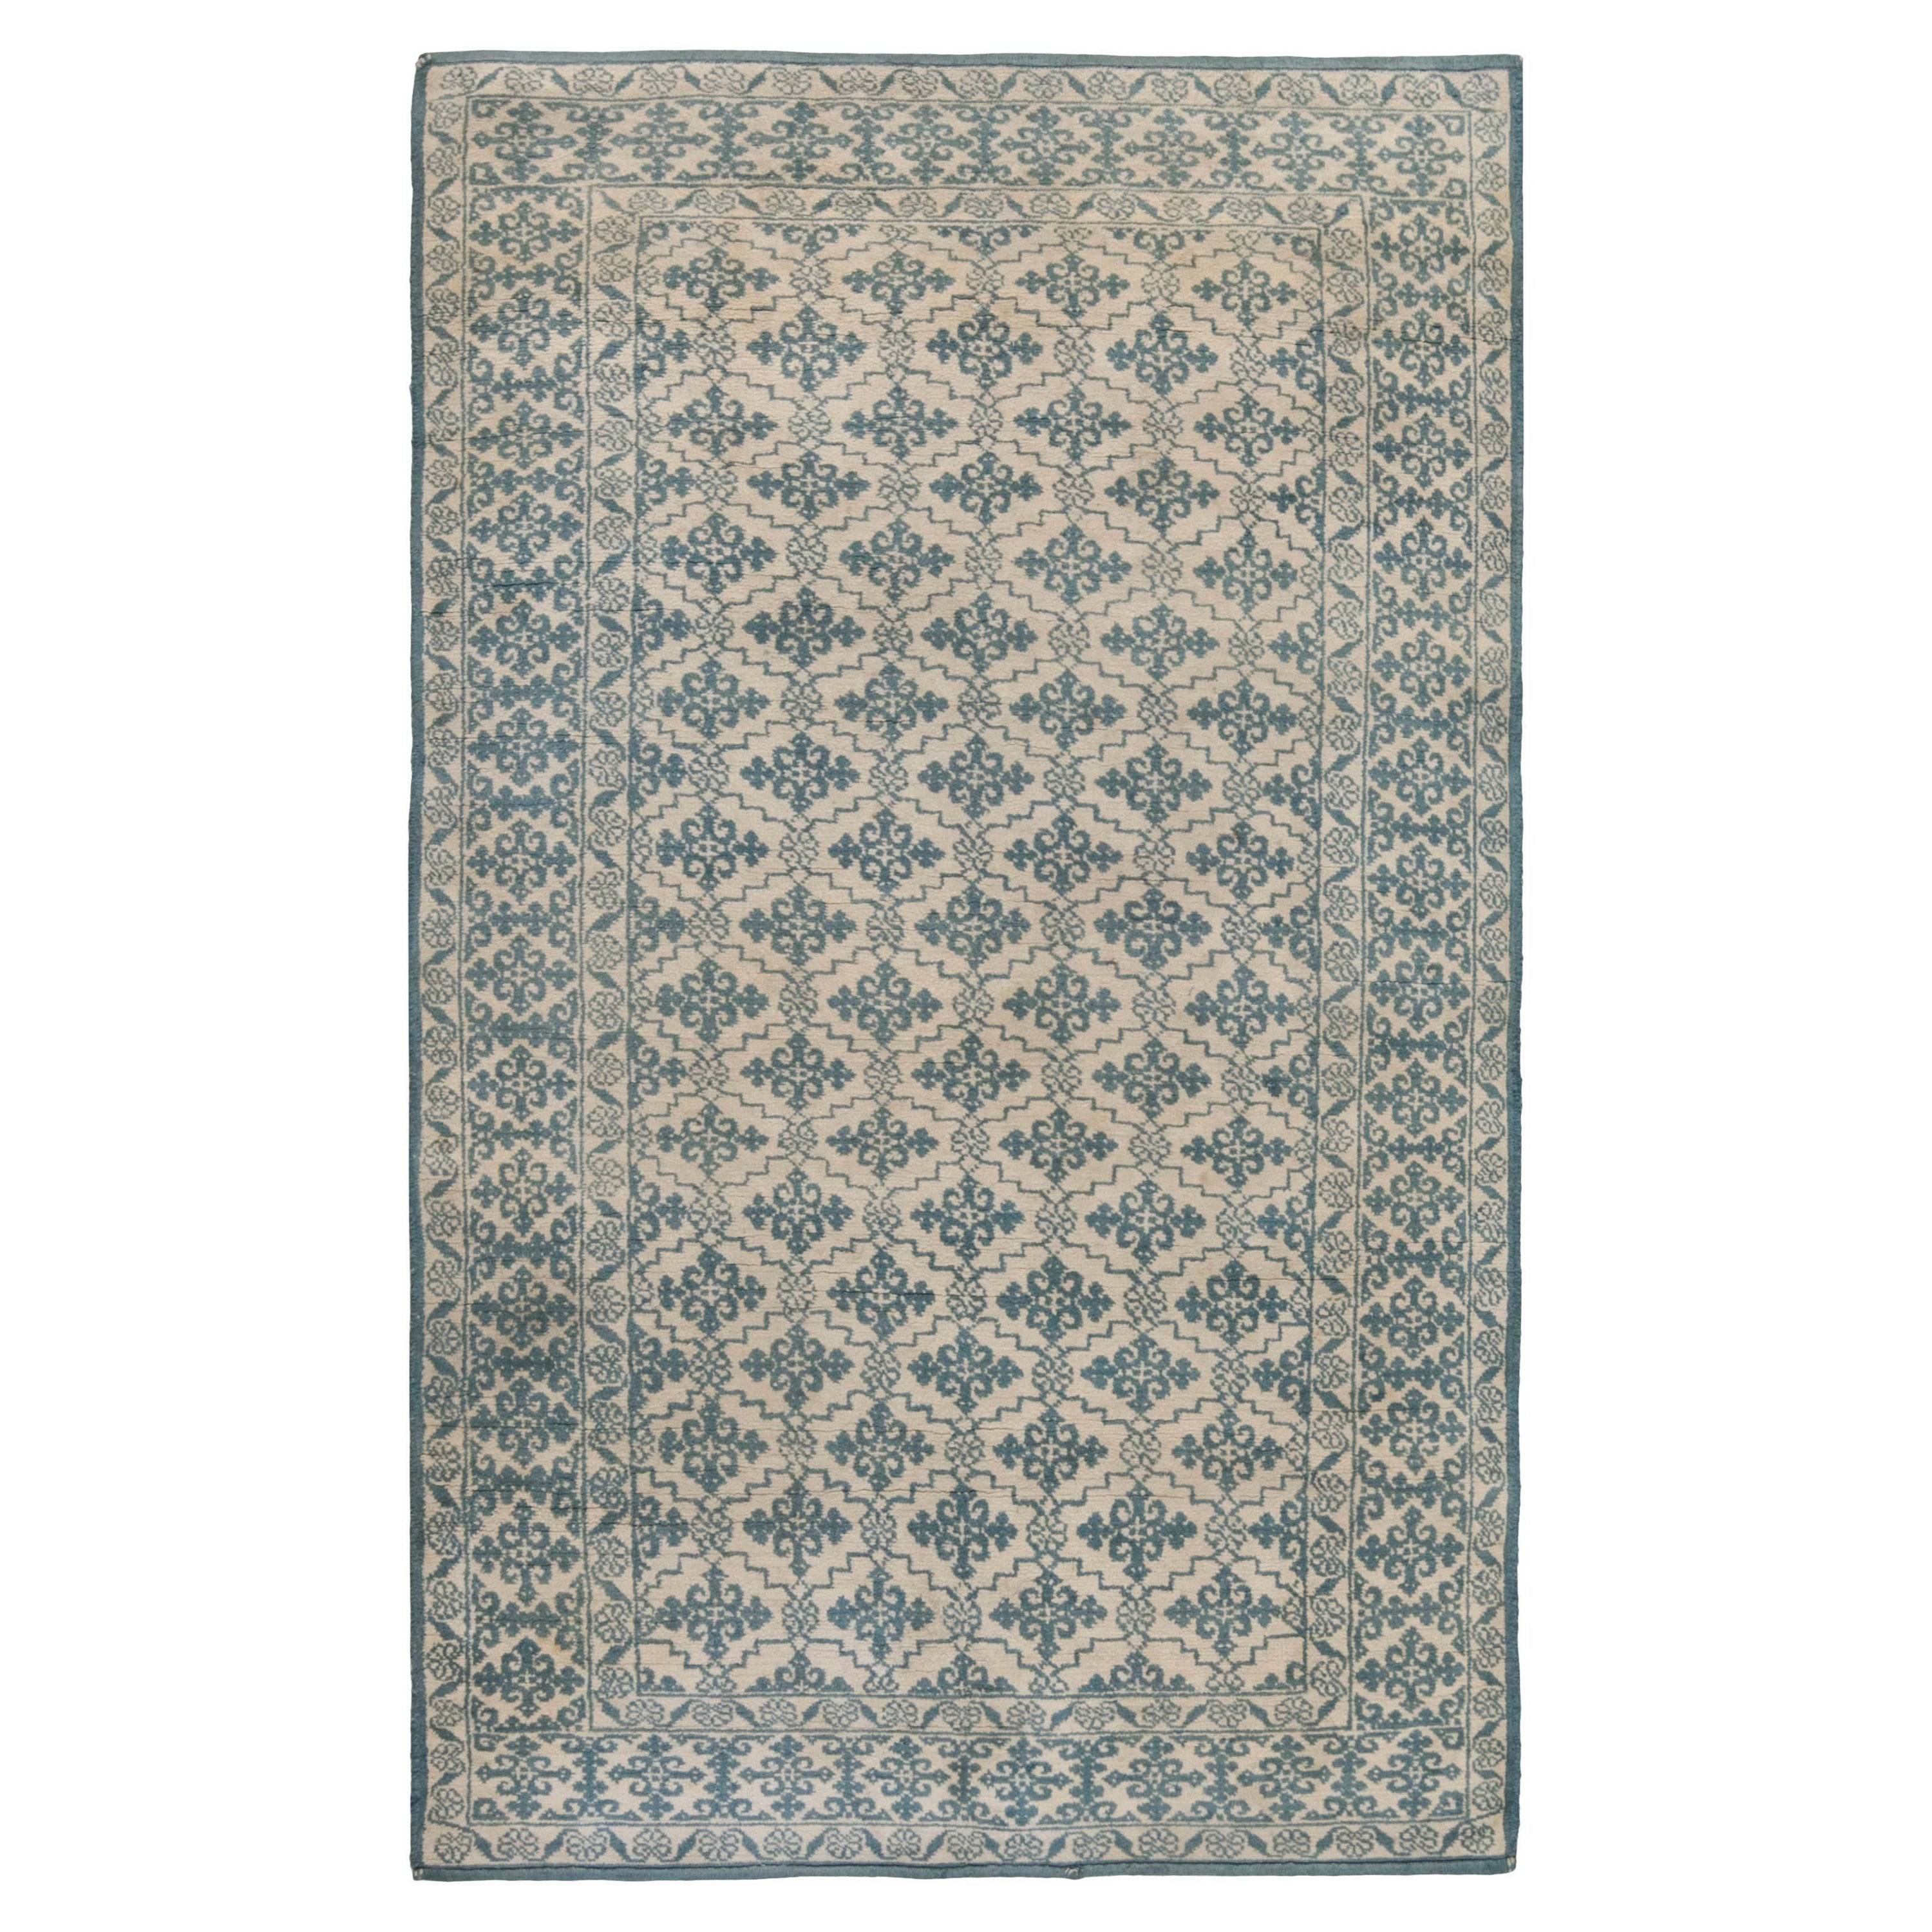 Early 20th Century Indian Agra Blue White Rug For Sale